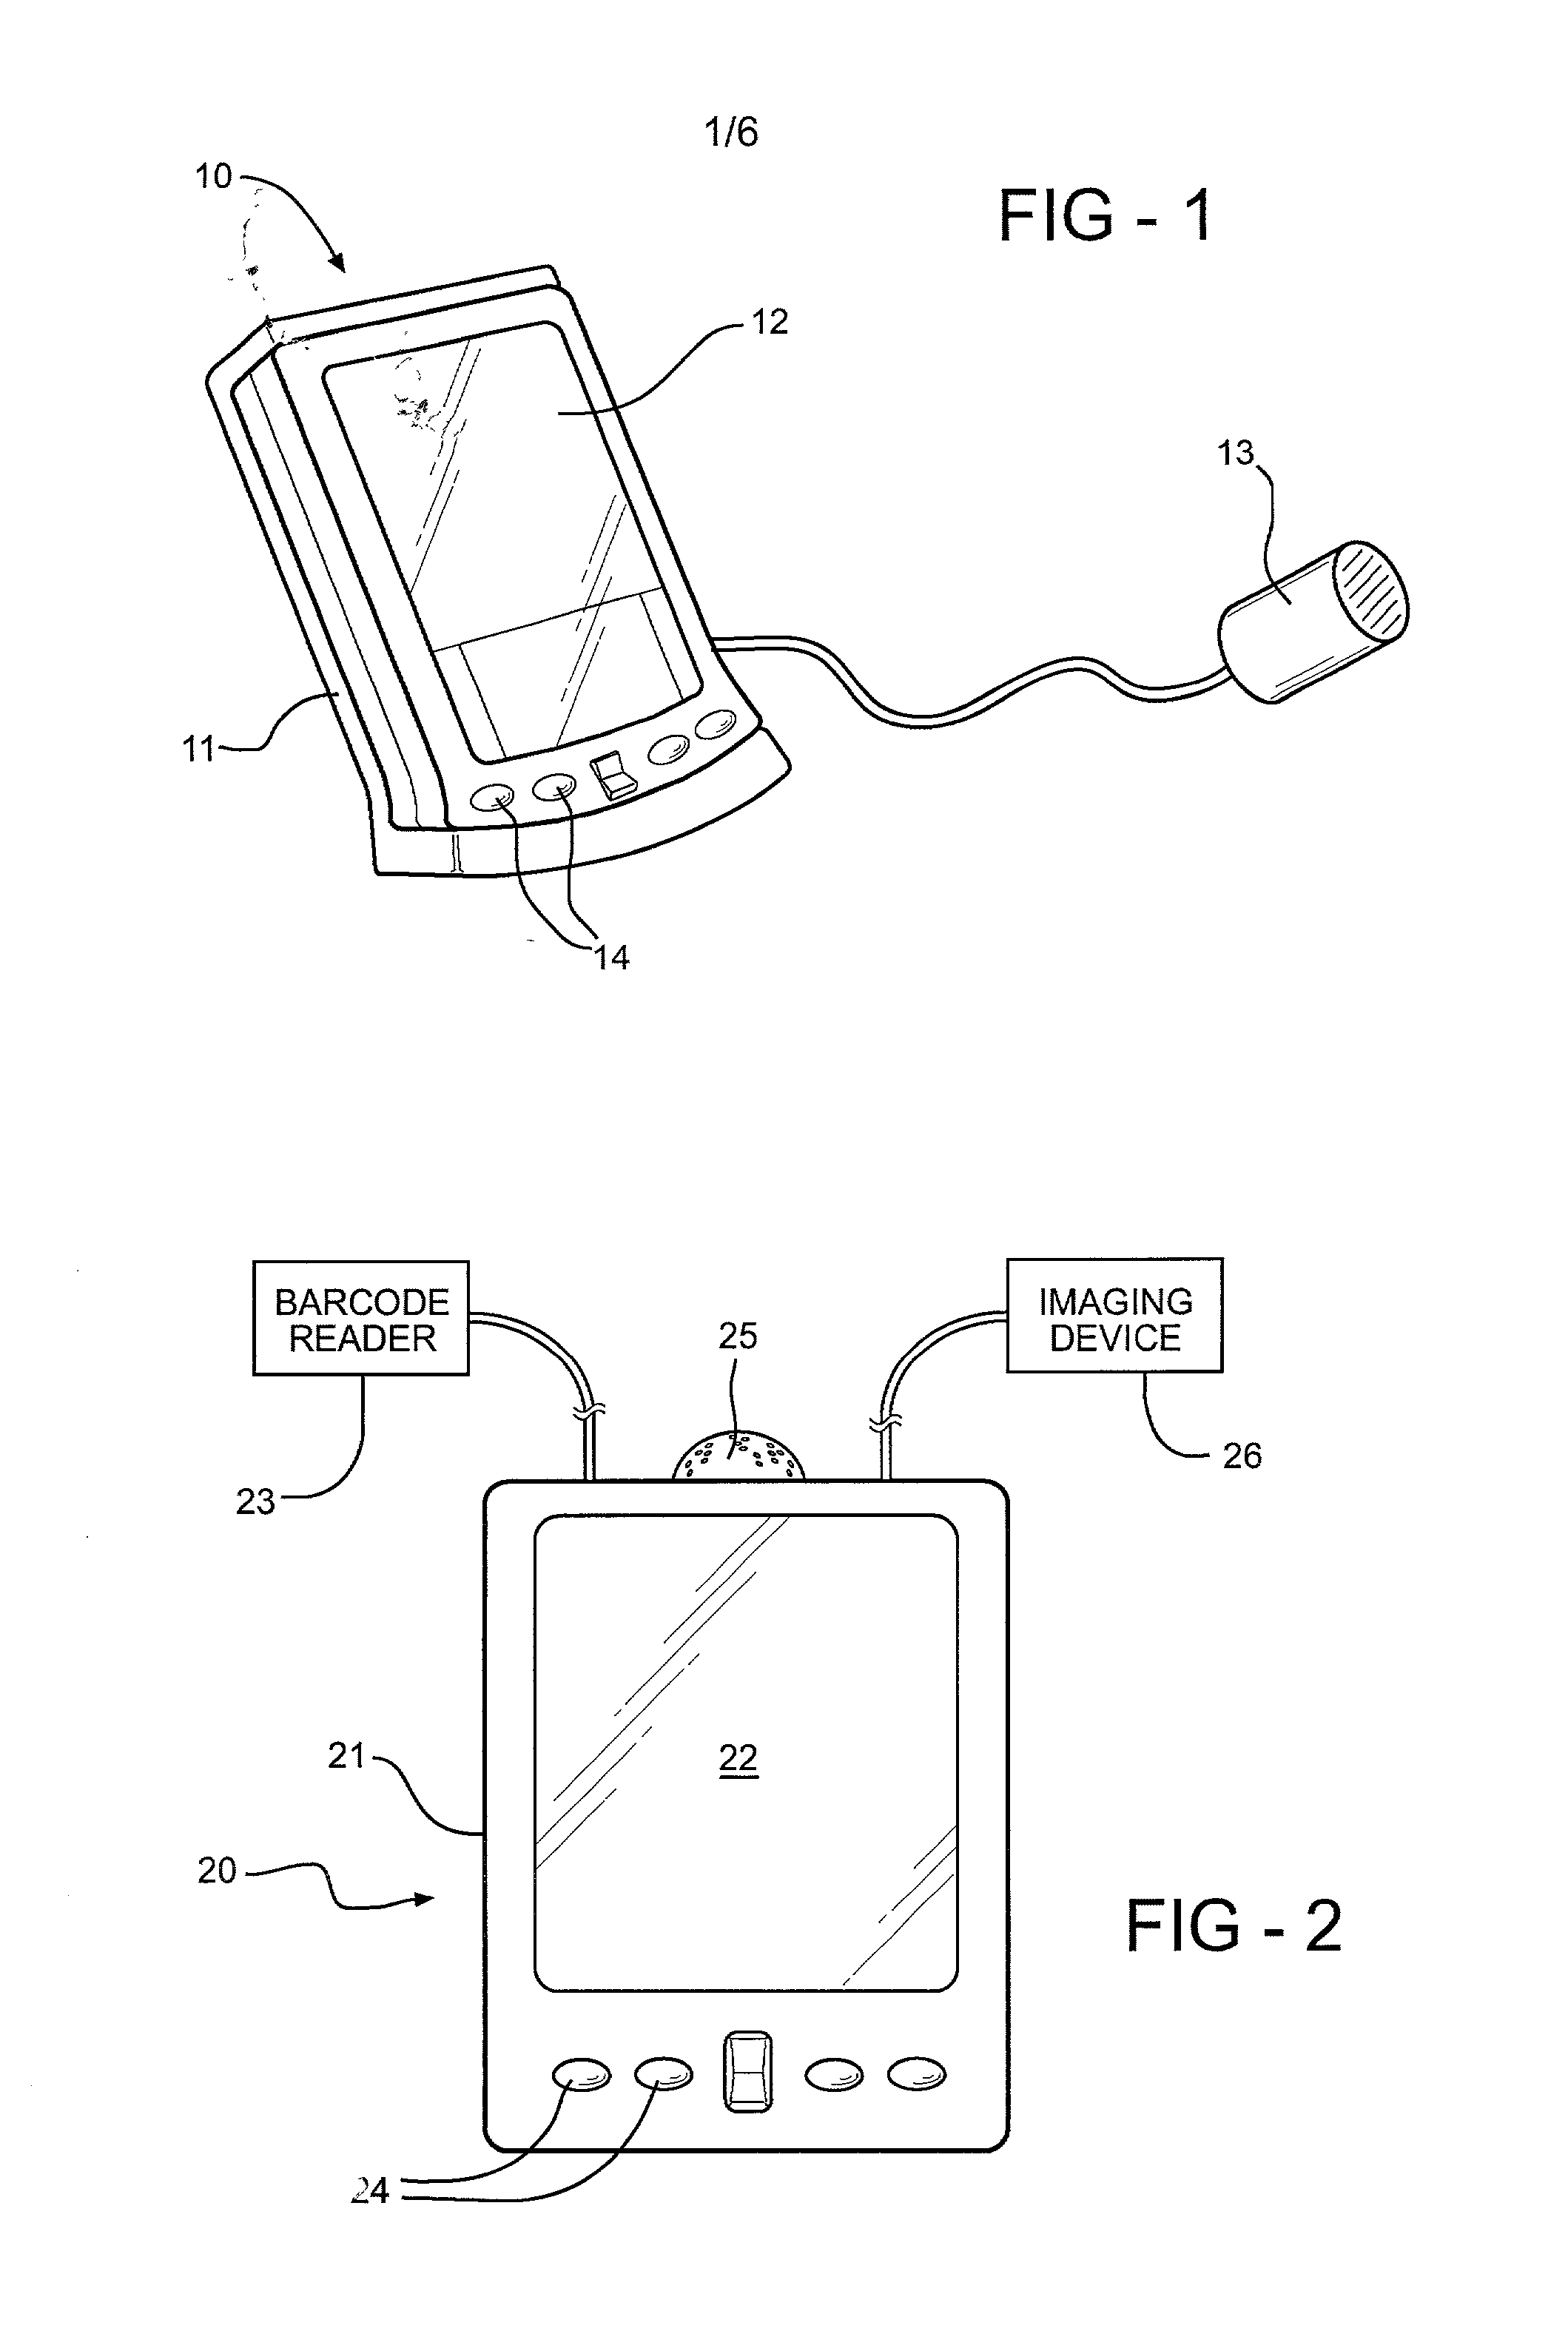 Portable computing apparatus particularly useful in a weight management program